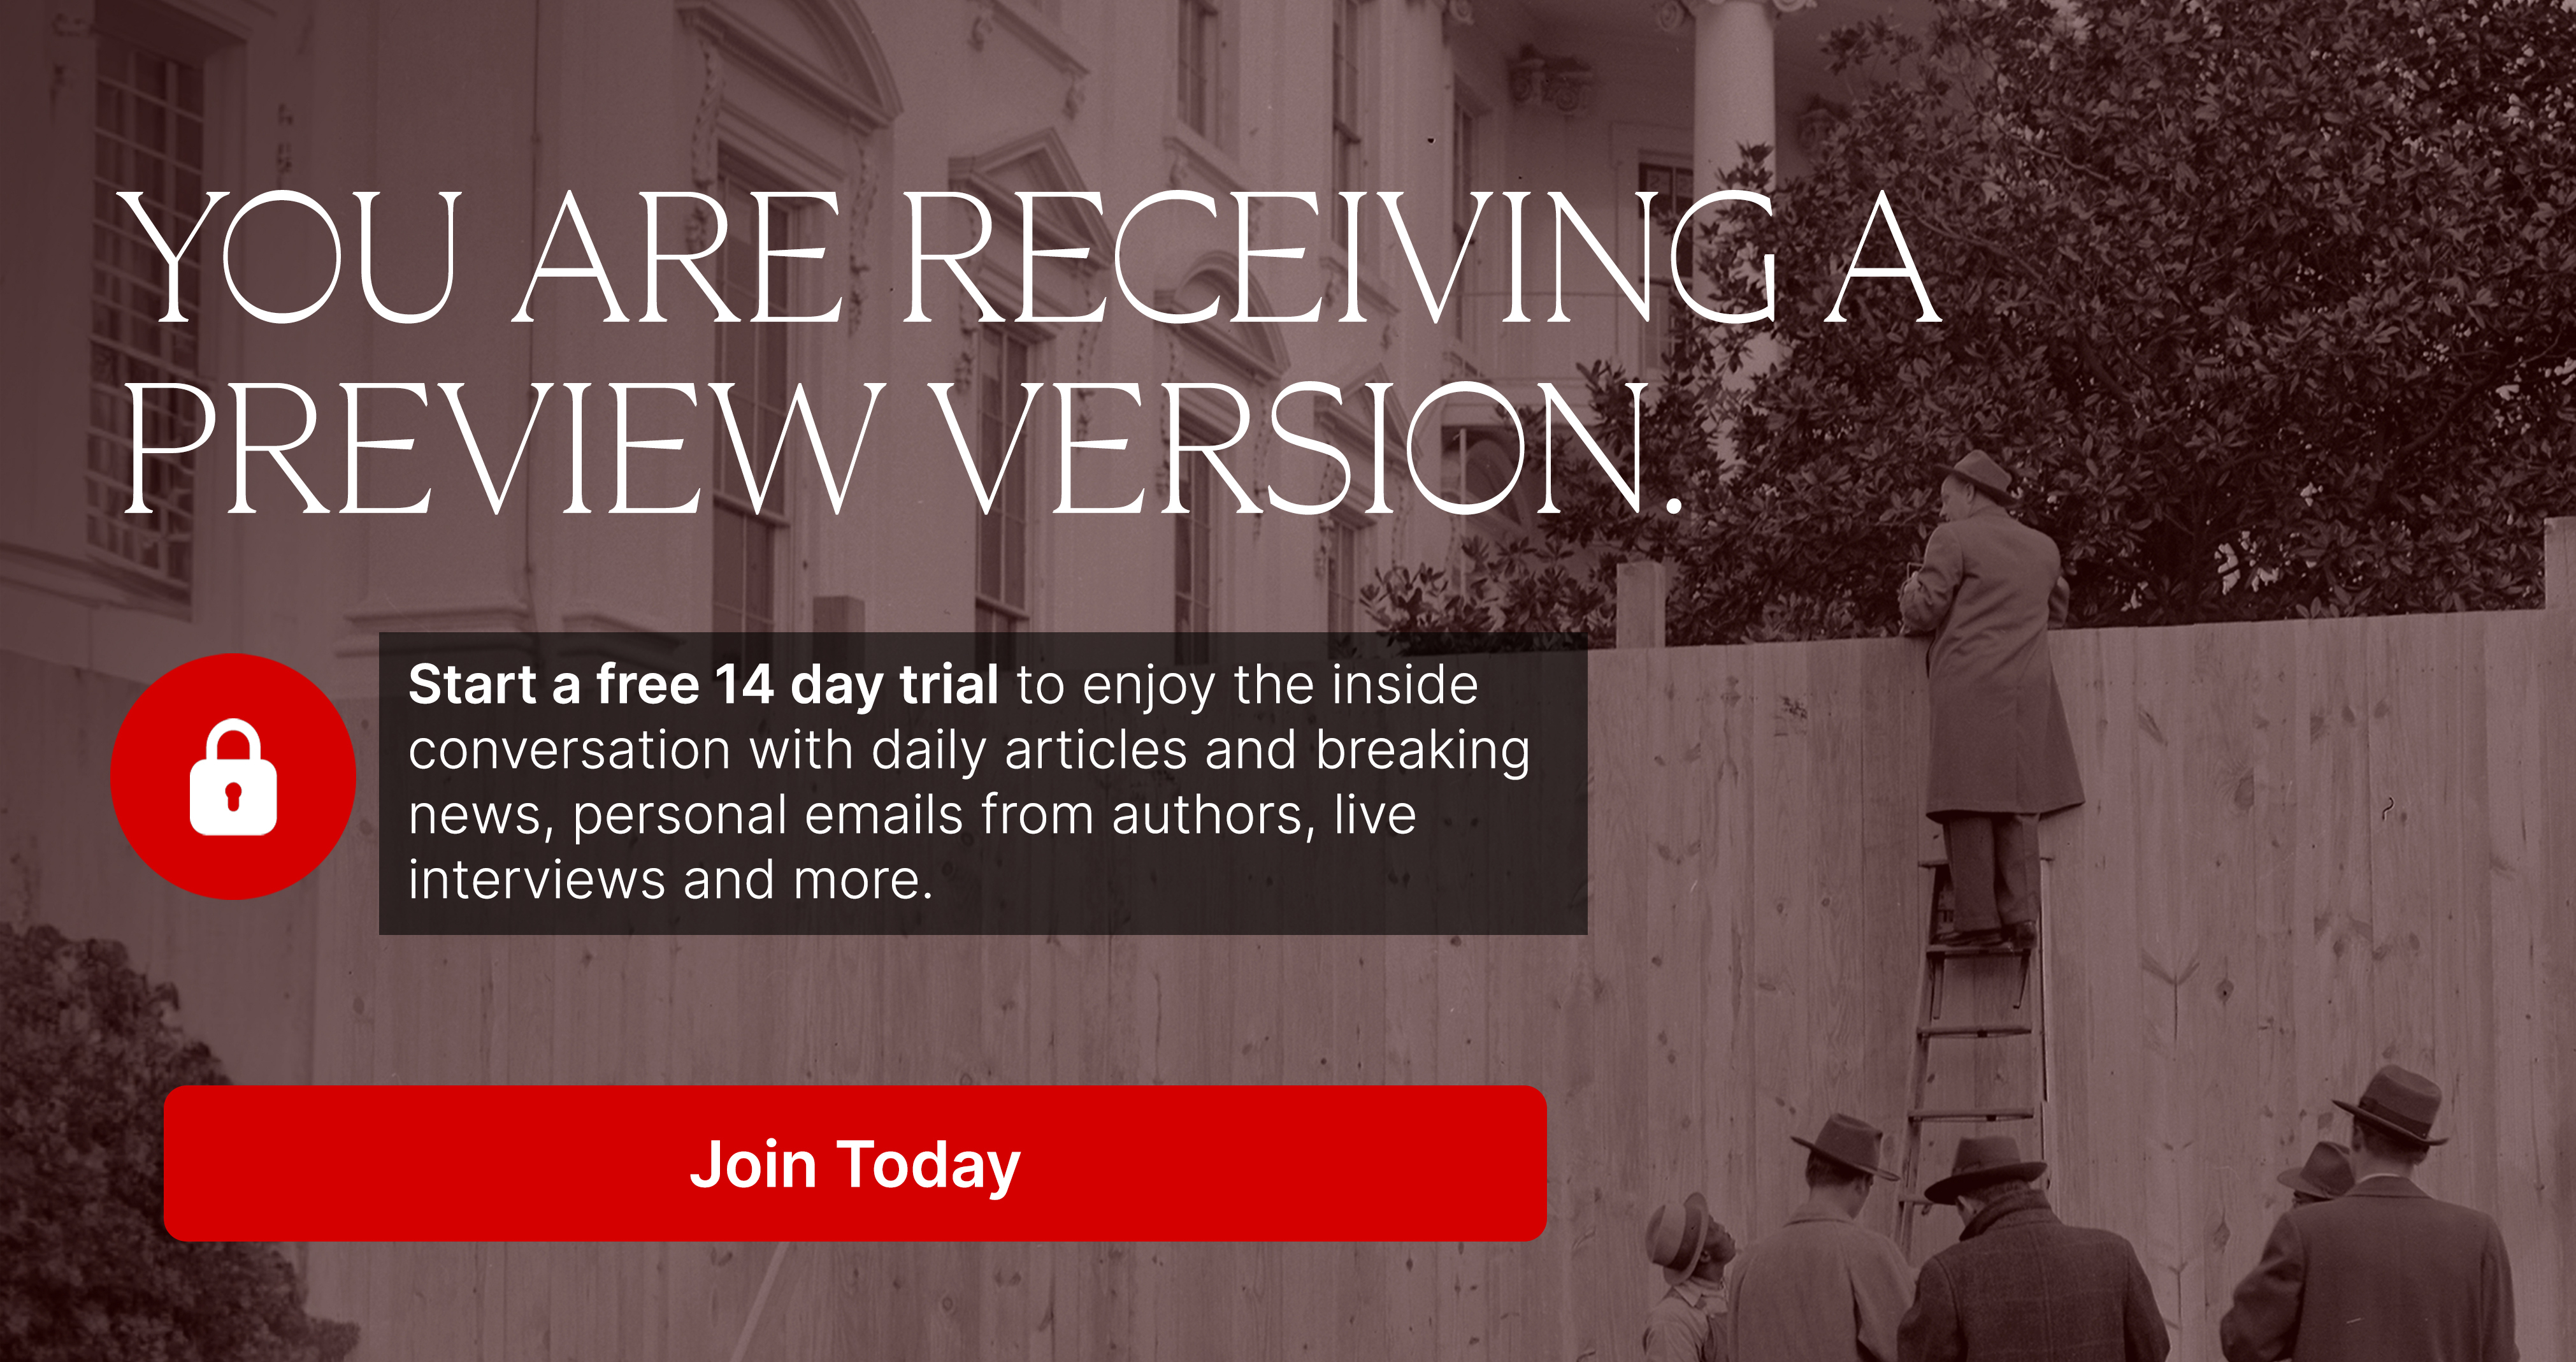 You are receiving a preview version. Start a free 14 day trial.